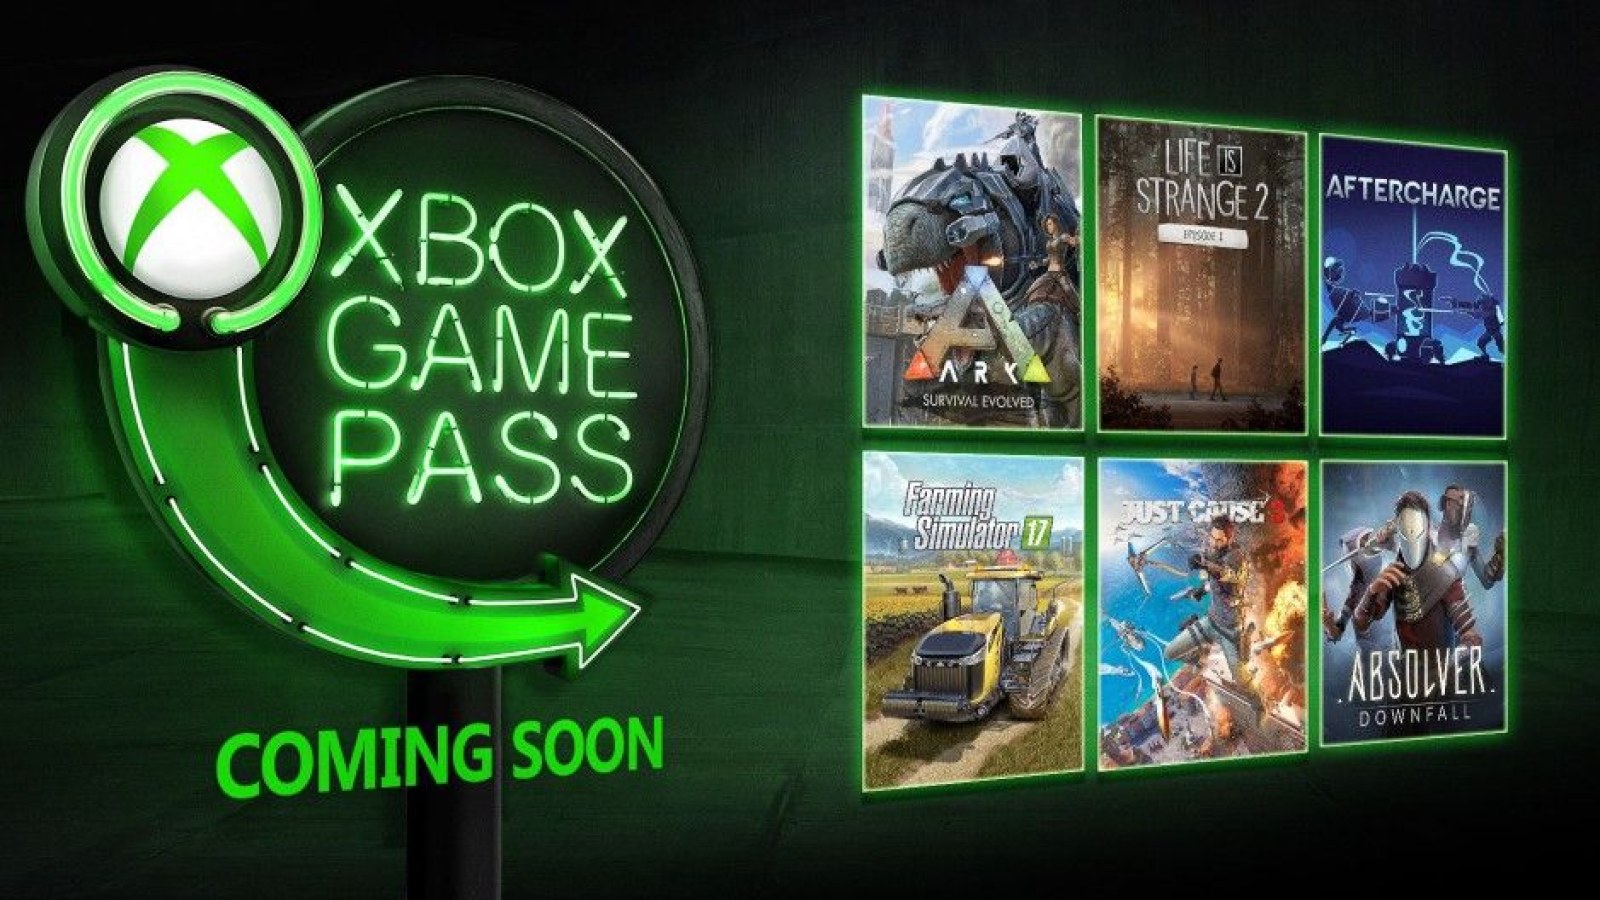 lys s Forbedre Nævne Xbox Game Pass January 2019 List Includes 'Life is Strange,' 'Ark' and  'Just Cause 3'